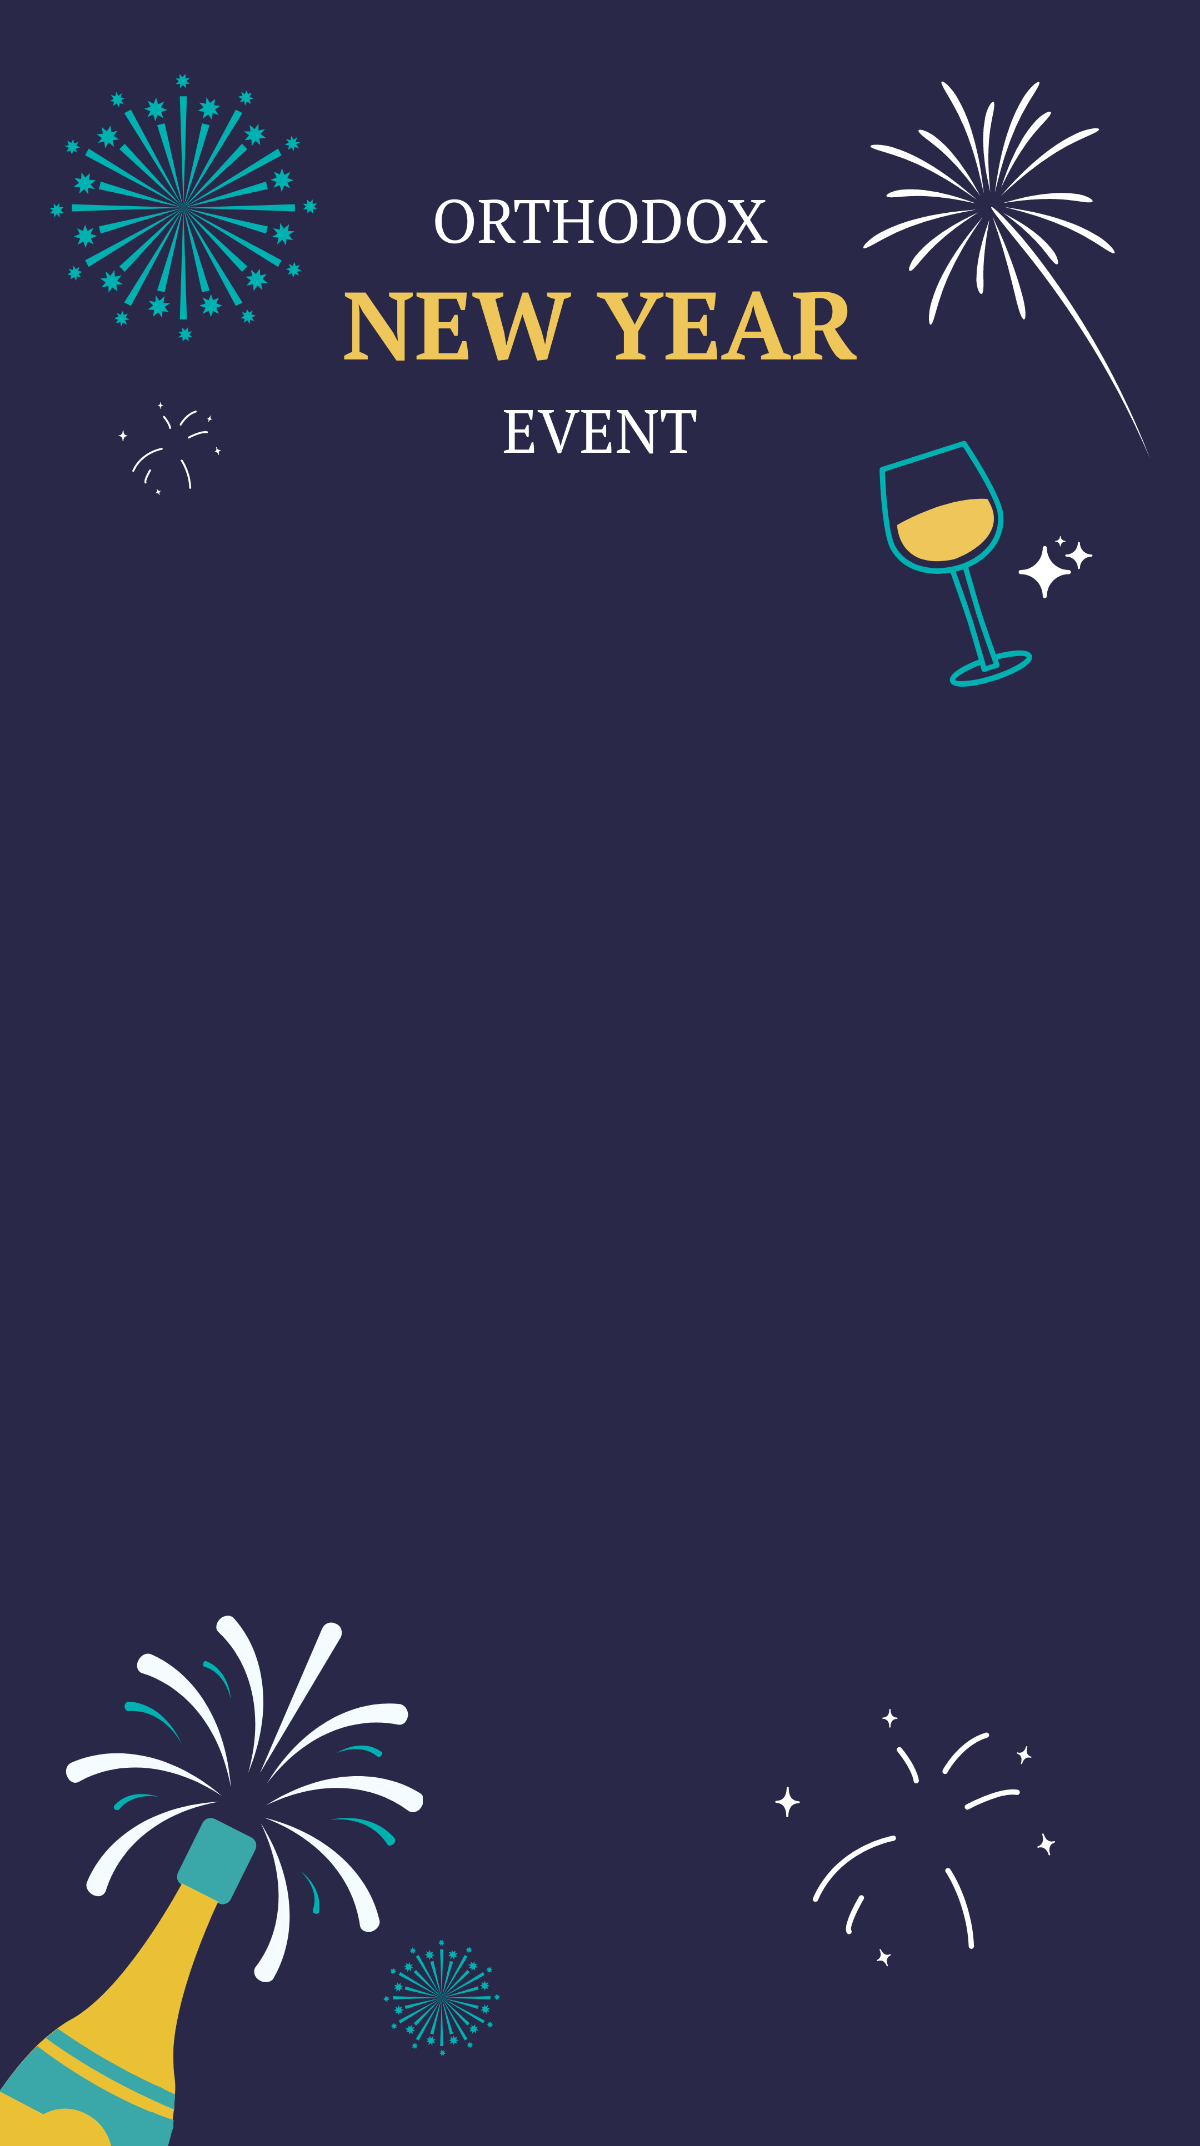 Orthodox New Year Event Snapchat Geofilter